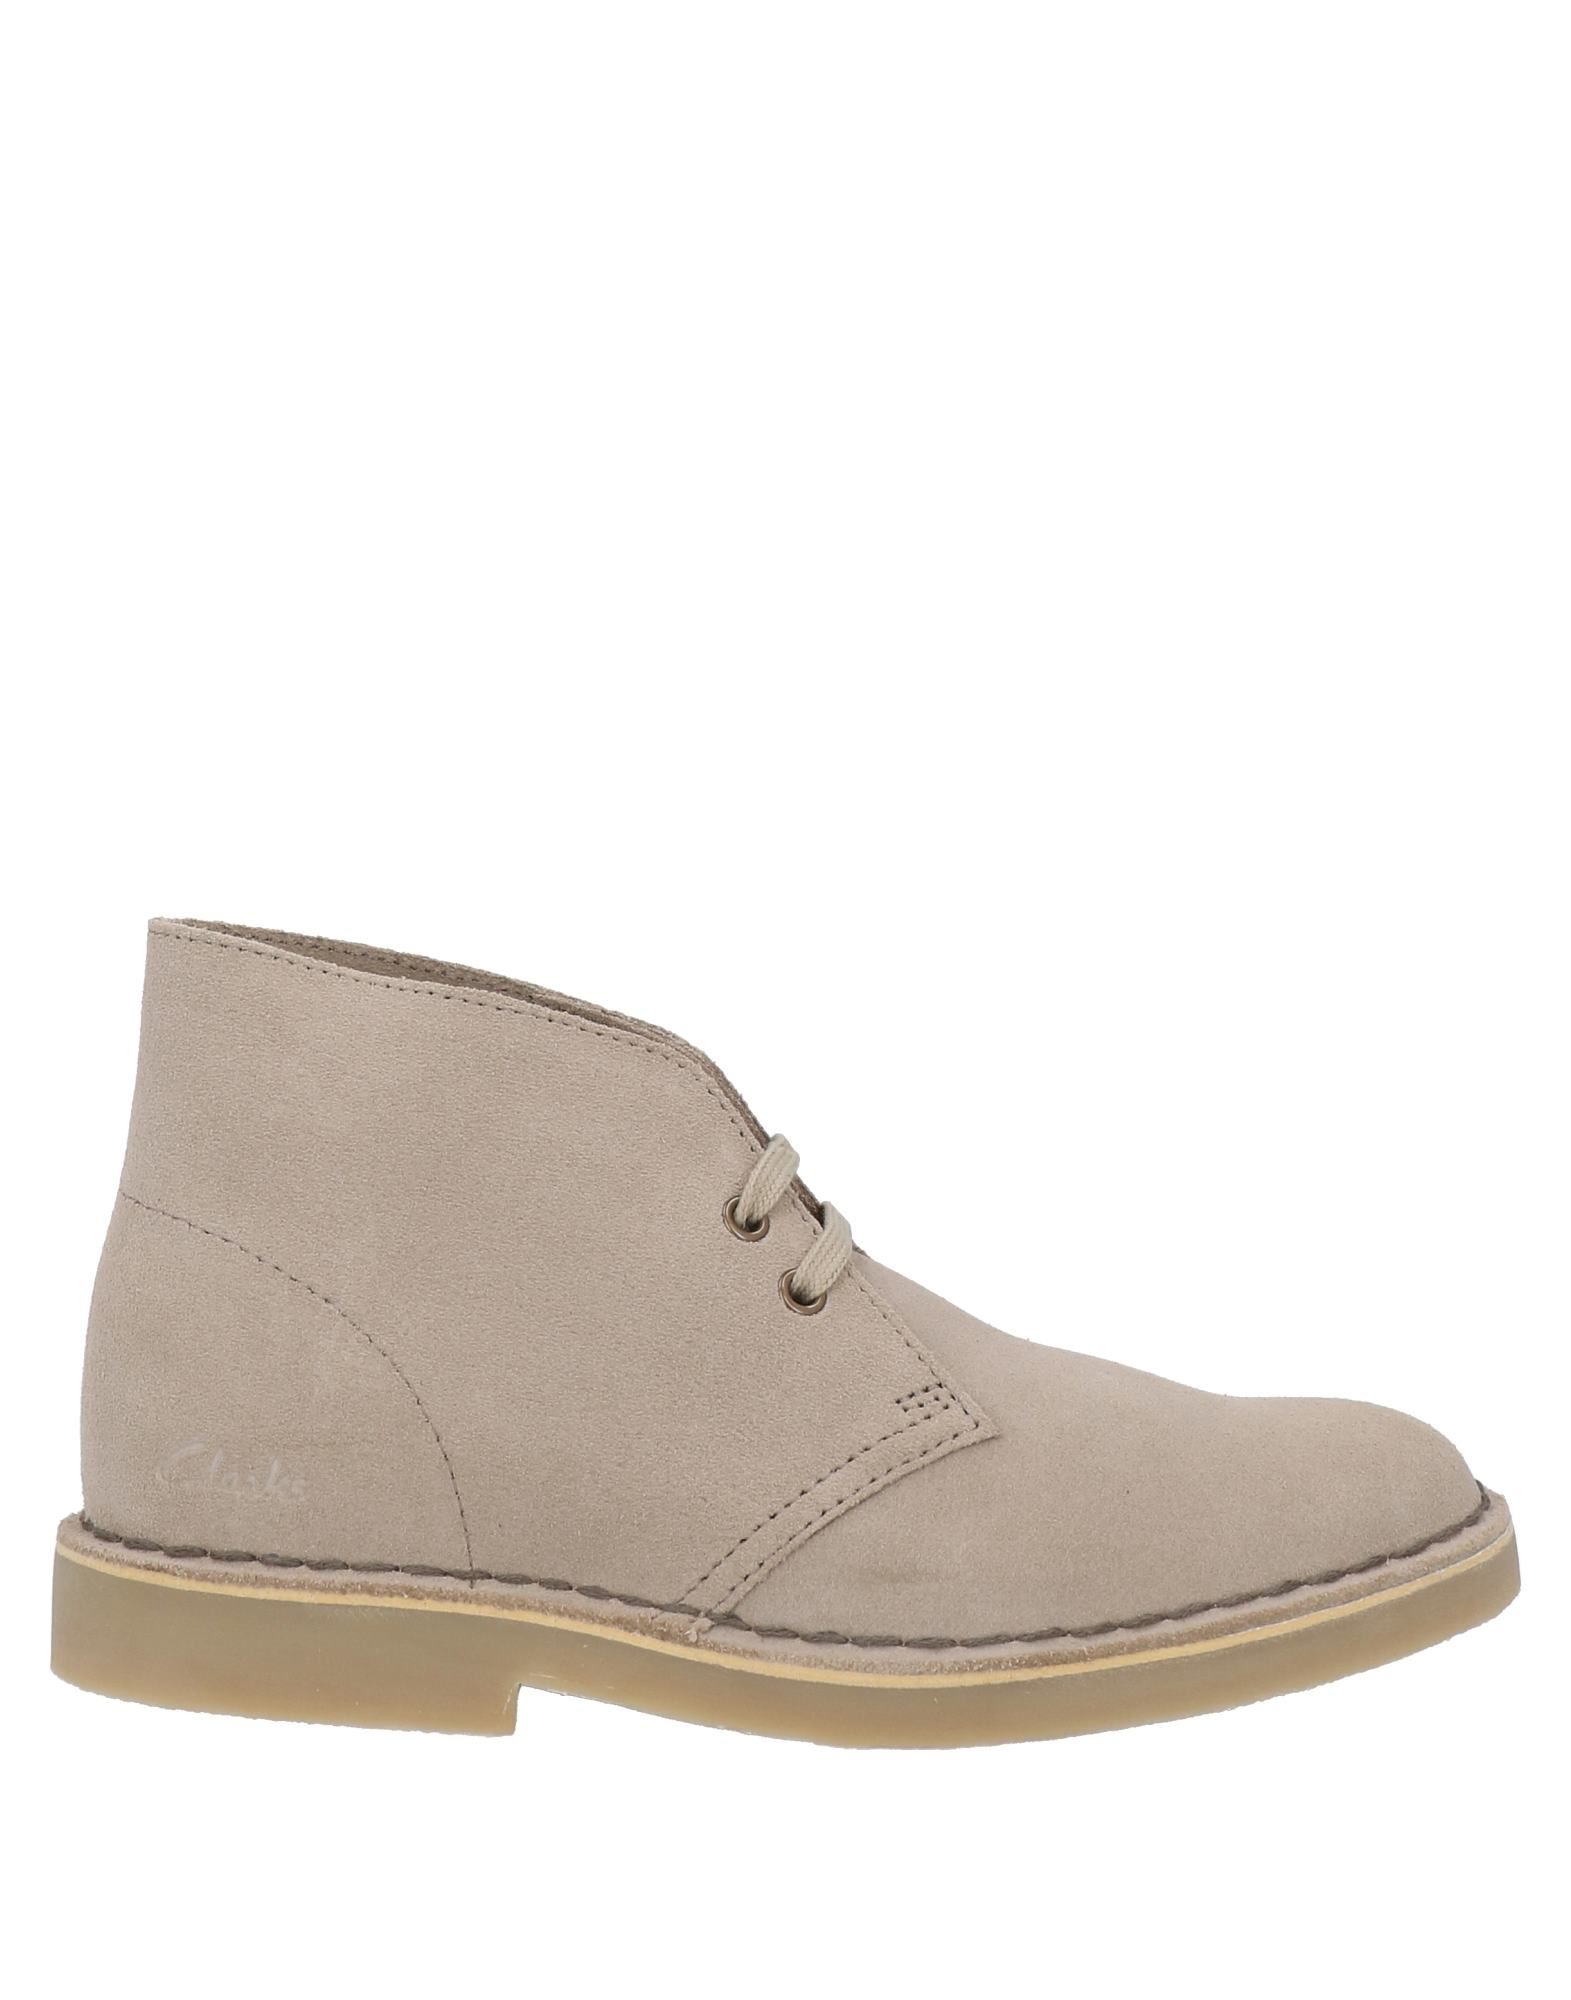 Clarks Ankle Boots In Sand